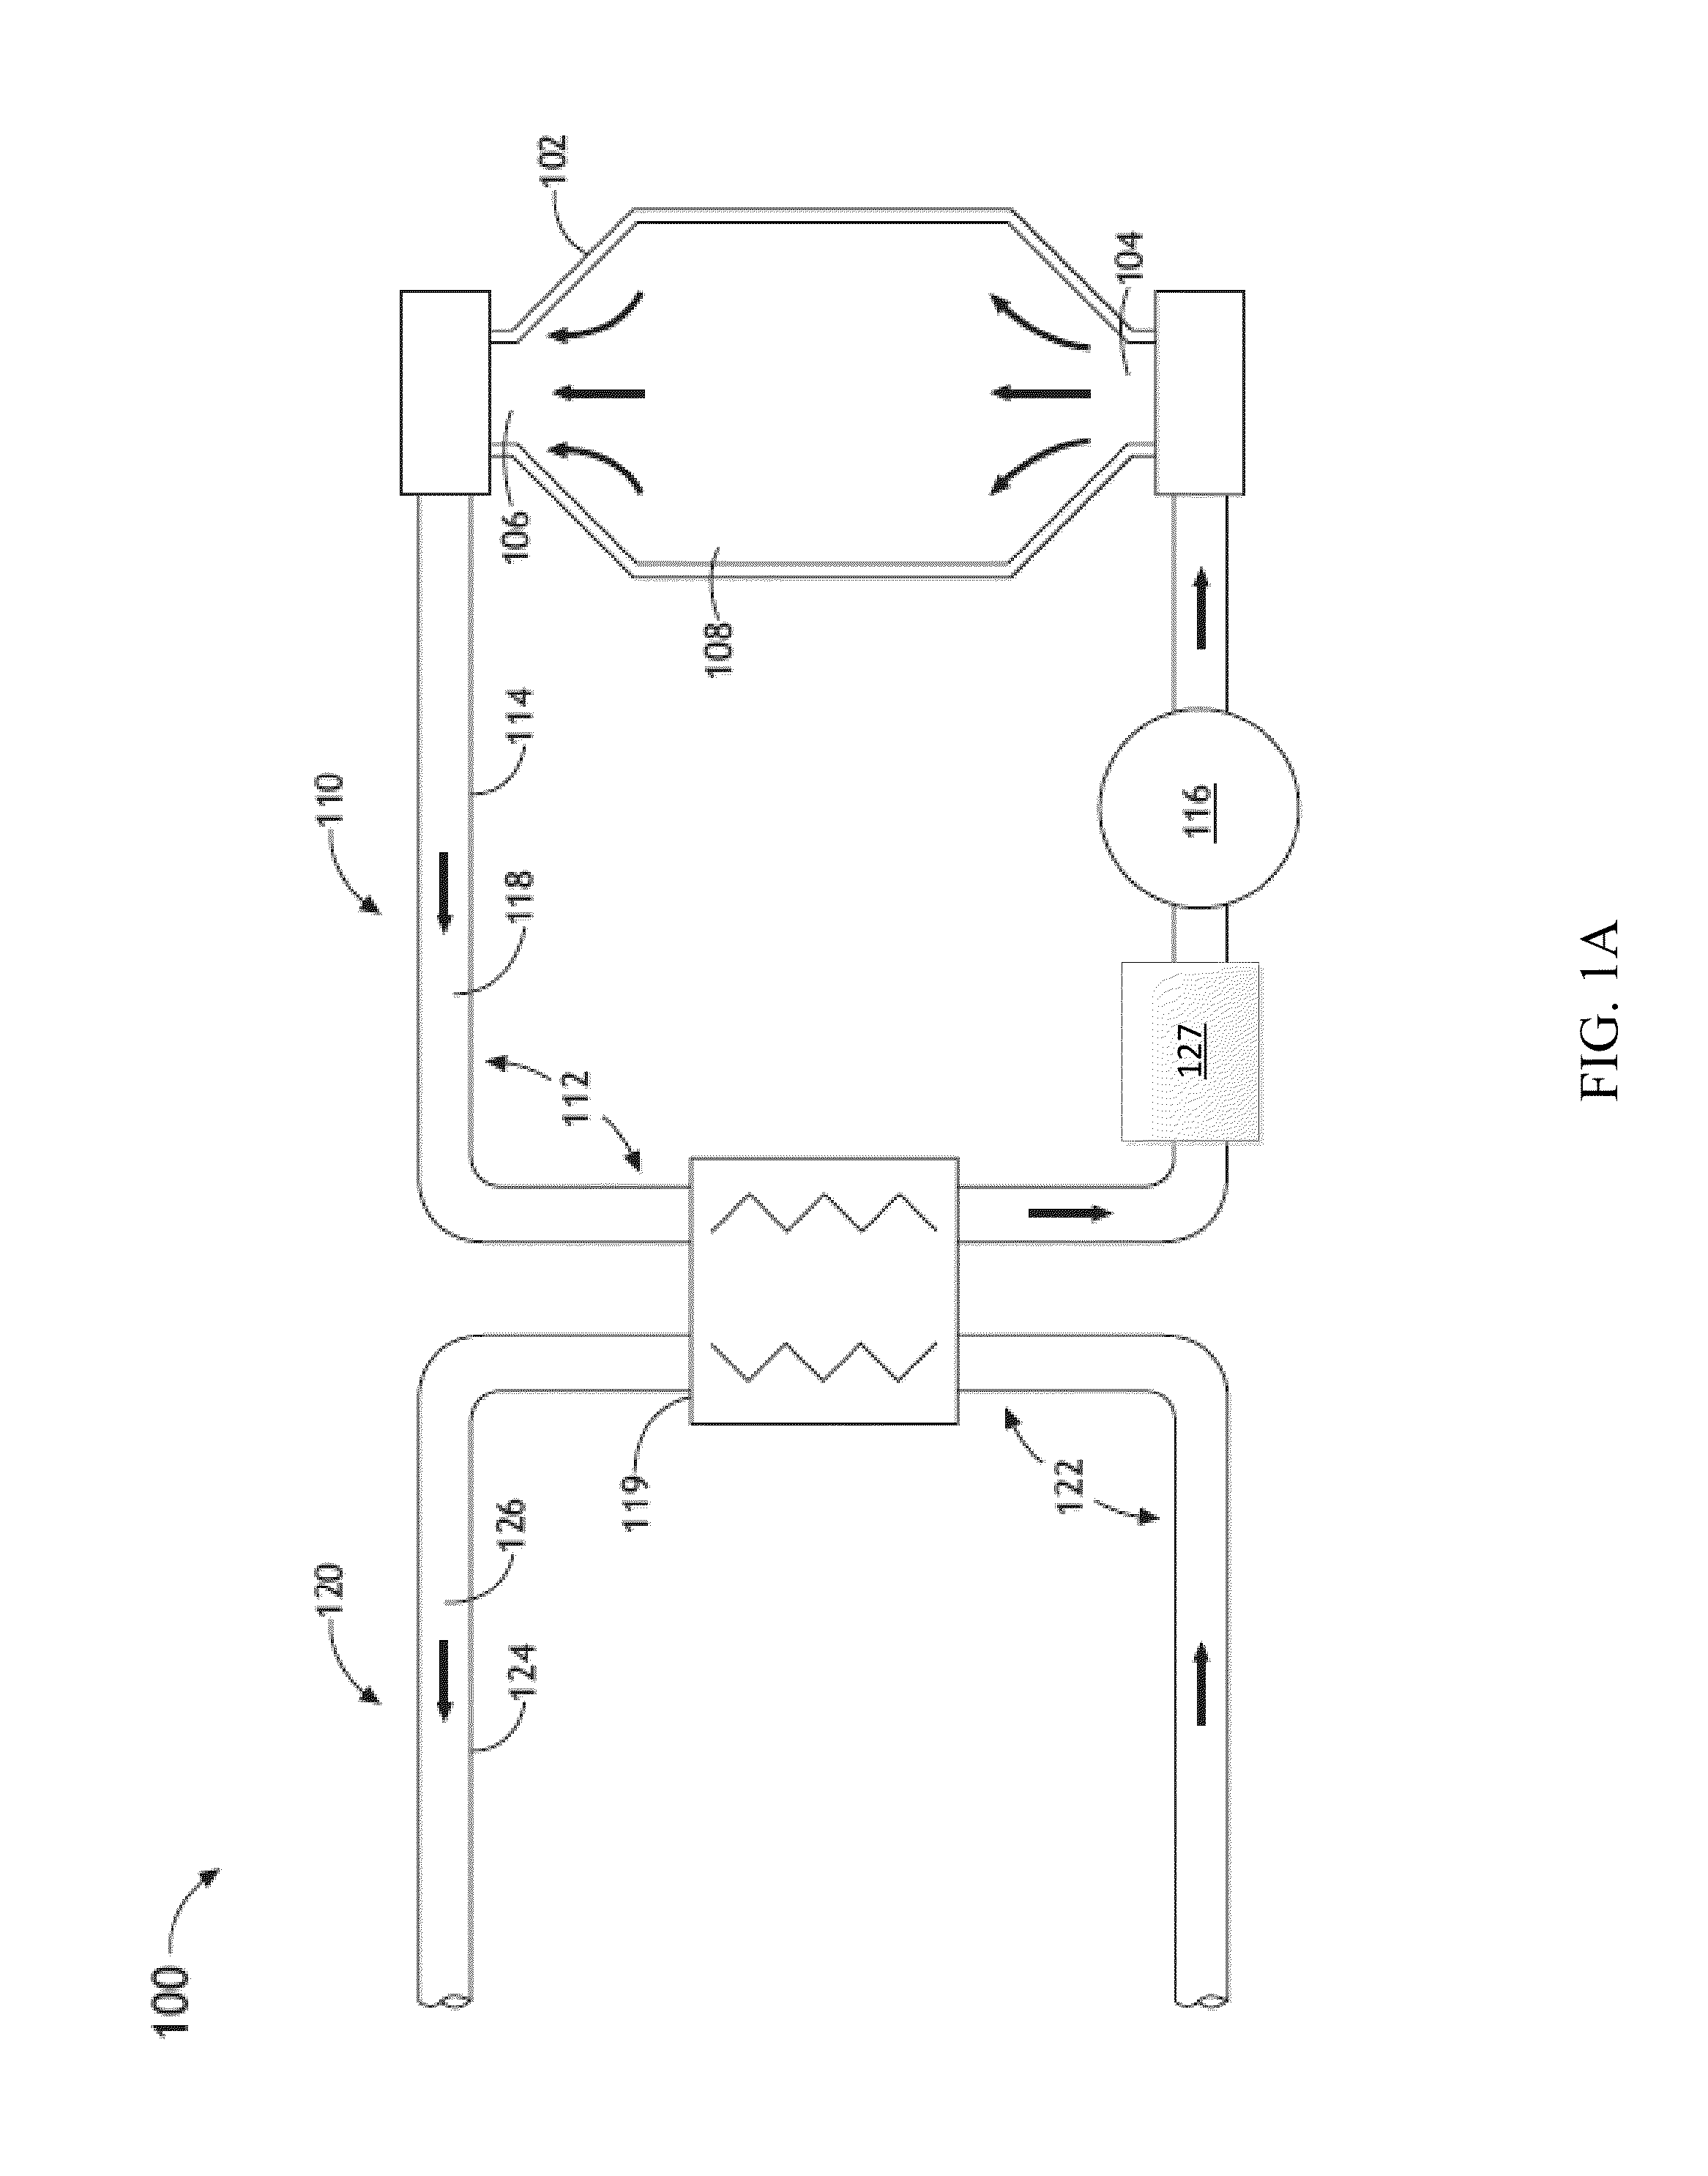 Molten nuclear fuel salts and related systems and methods